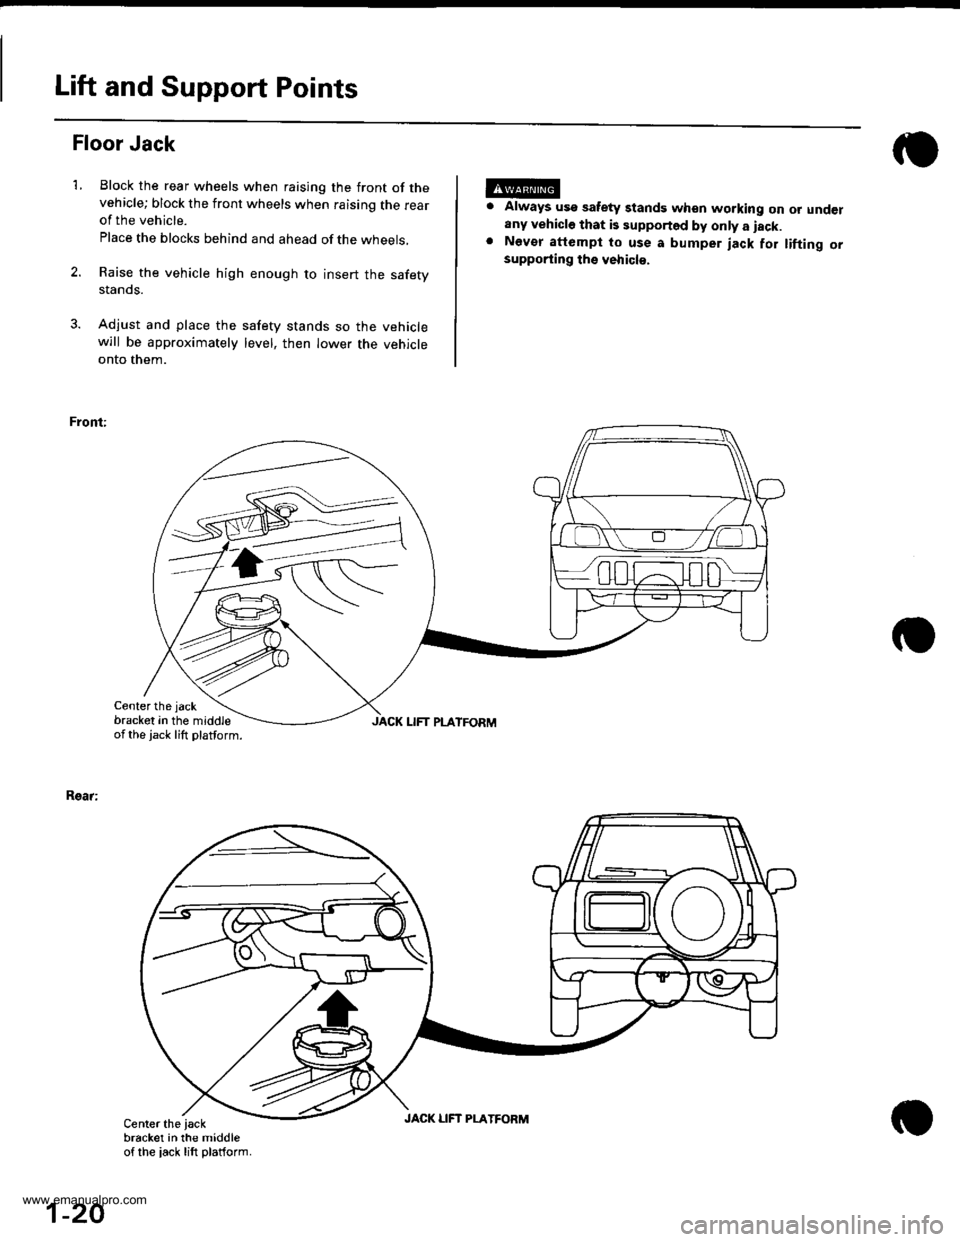 HONDA CR-V 1998 RD1-RD3 / 1.G Workshop Manual 
Lift and Support Points
1.
Floor Jack
Block the rear wheels when raising the front of thevehicle; block the front wheels when raising the rearof the vehicle.
Place the blocks behind and ahead of the 